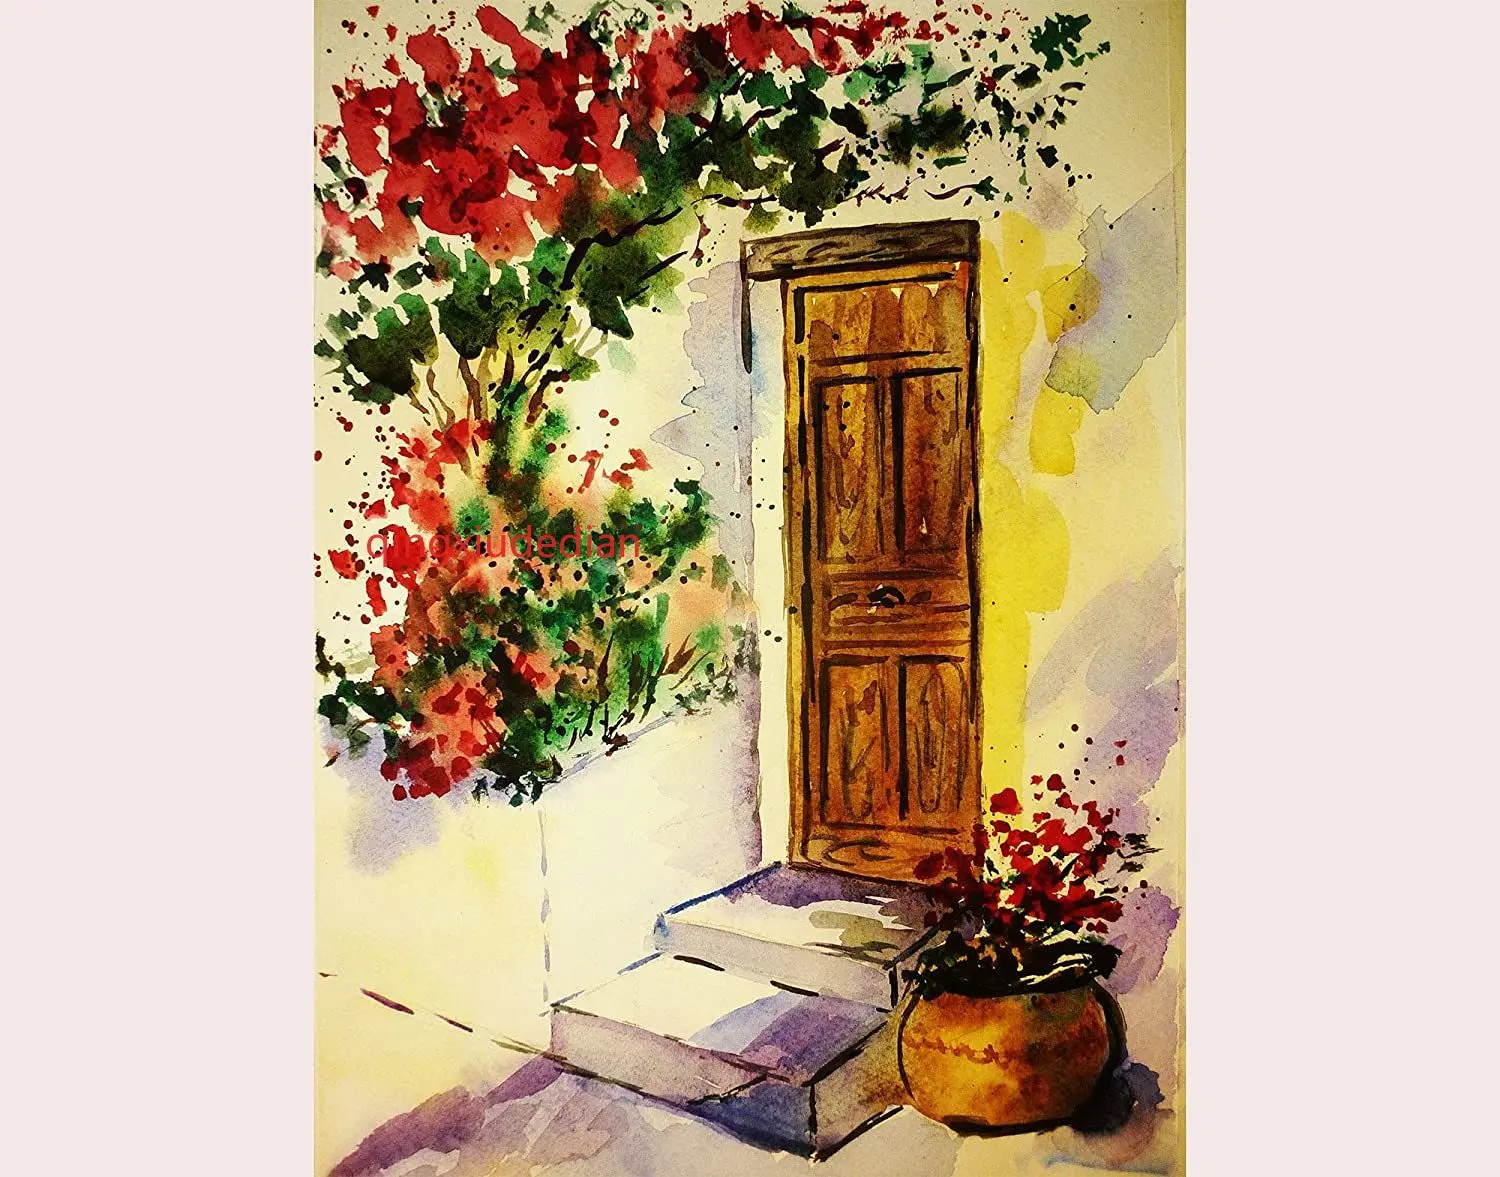 

Eeypy Door Summer Flower Entrance Art Front House Wall Art Metal Plate Plaque Iron Painting Tin Sign